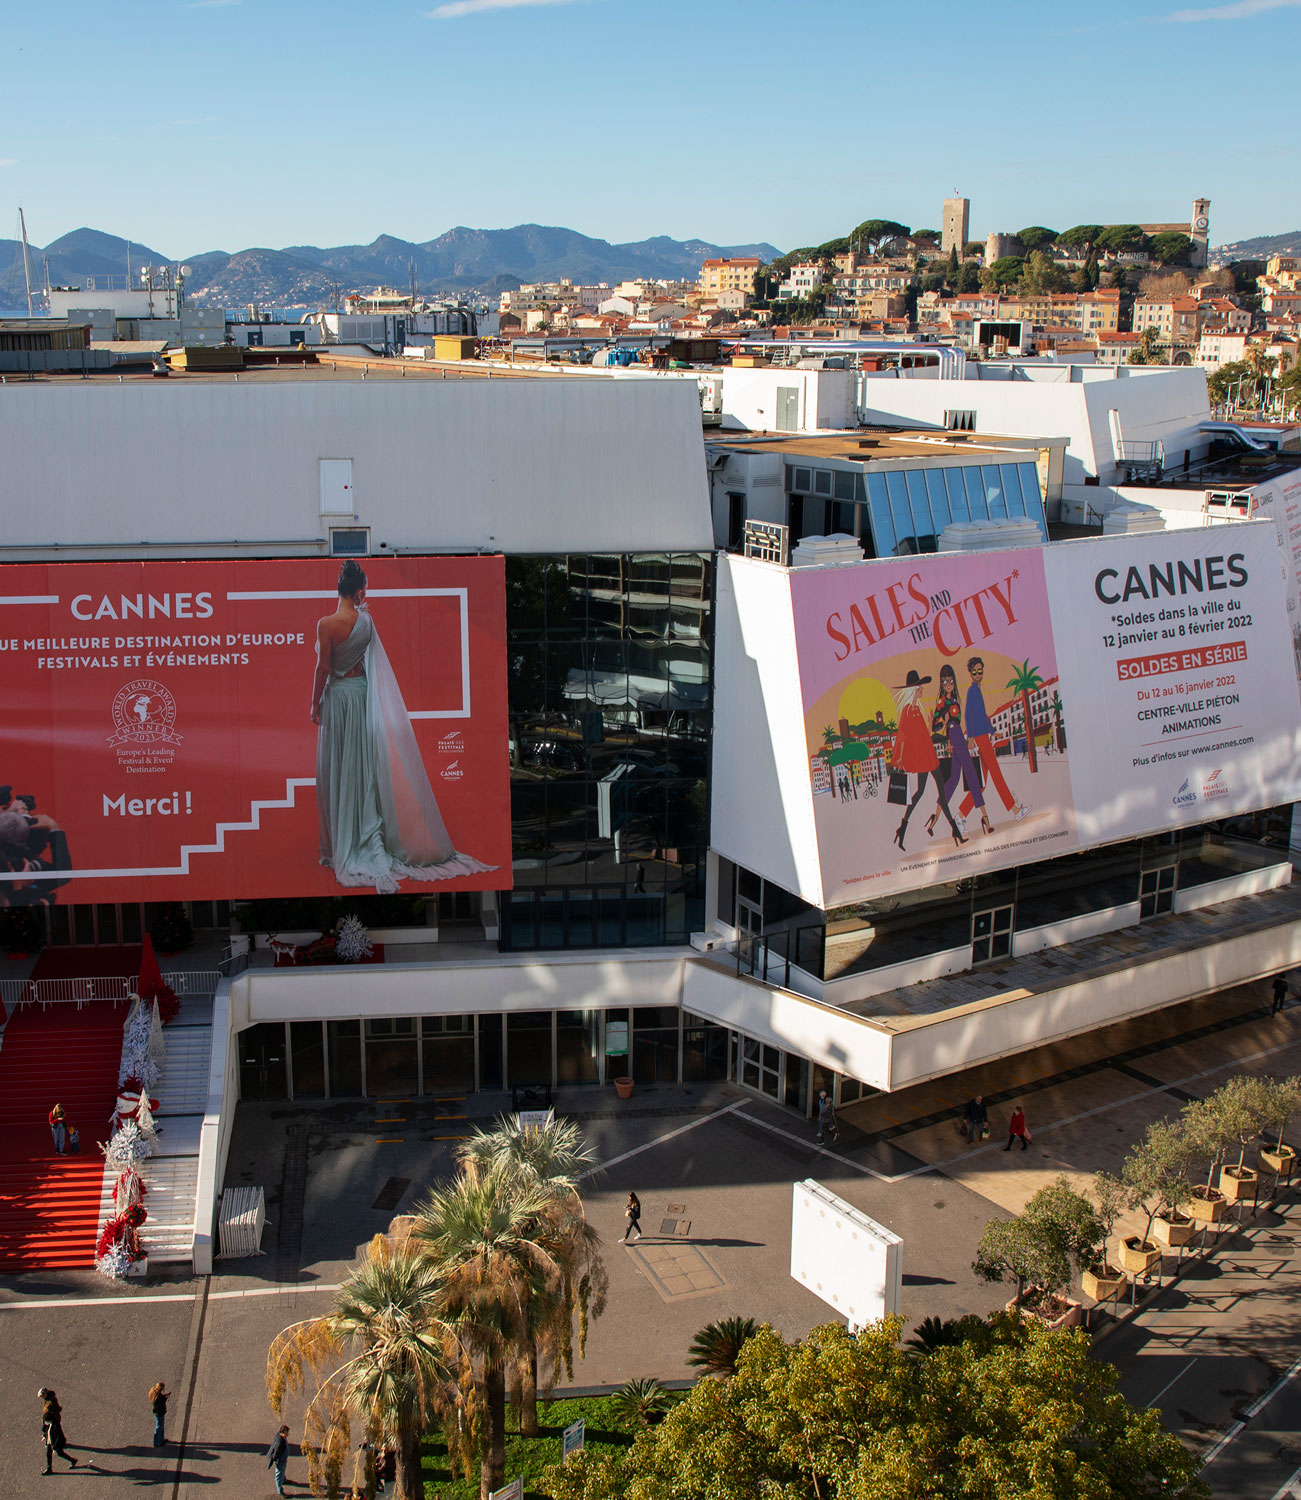 CANNES-SALES-AND-THE-CITY-2022-photo.jpg